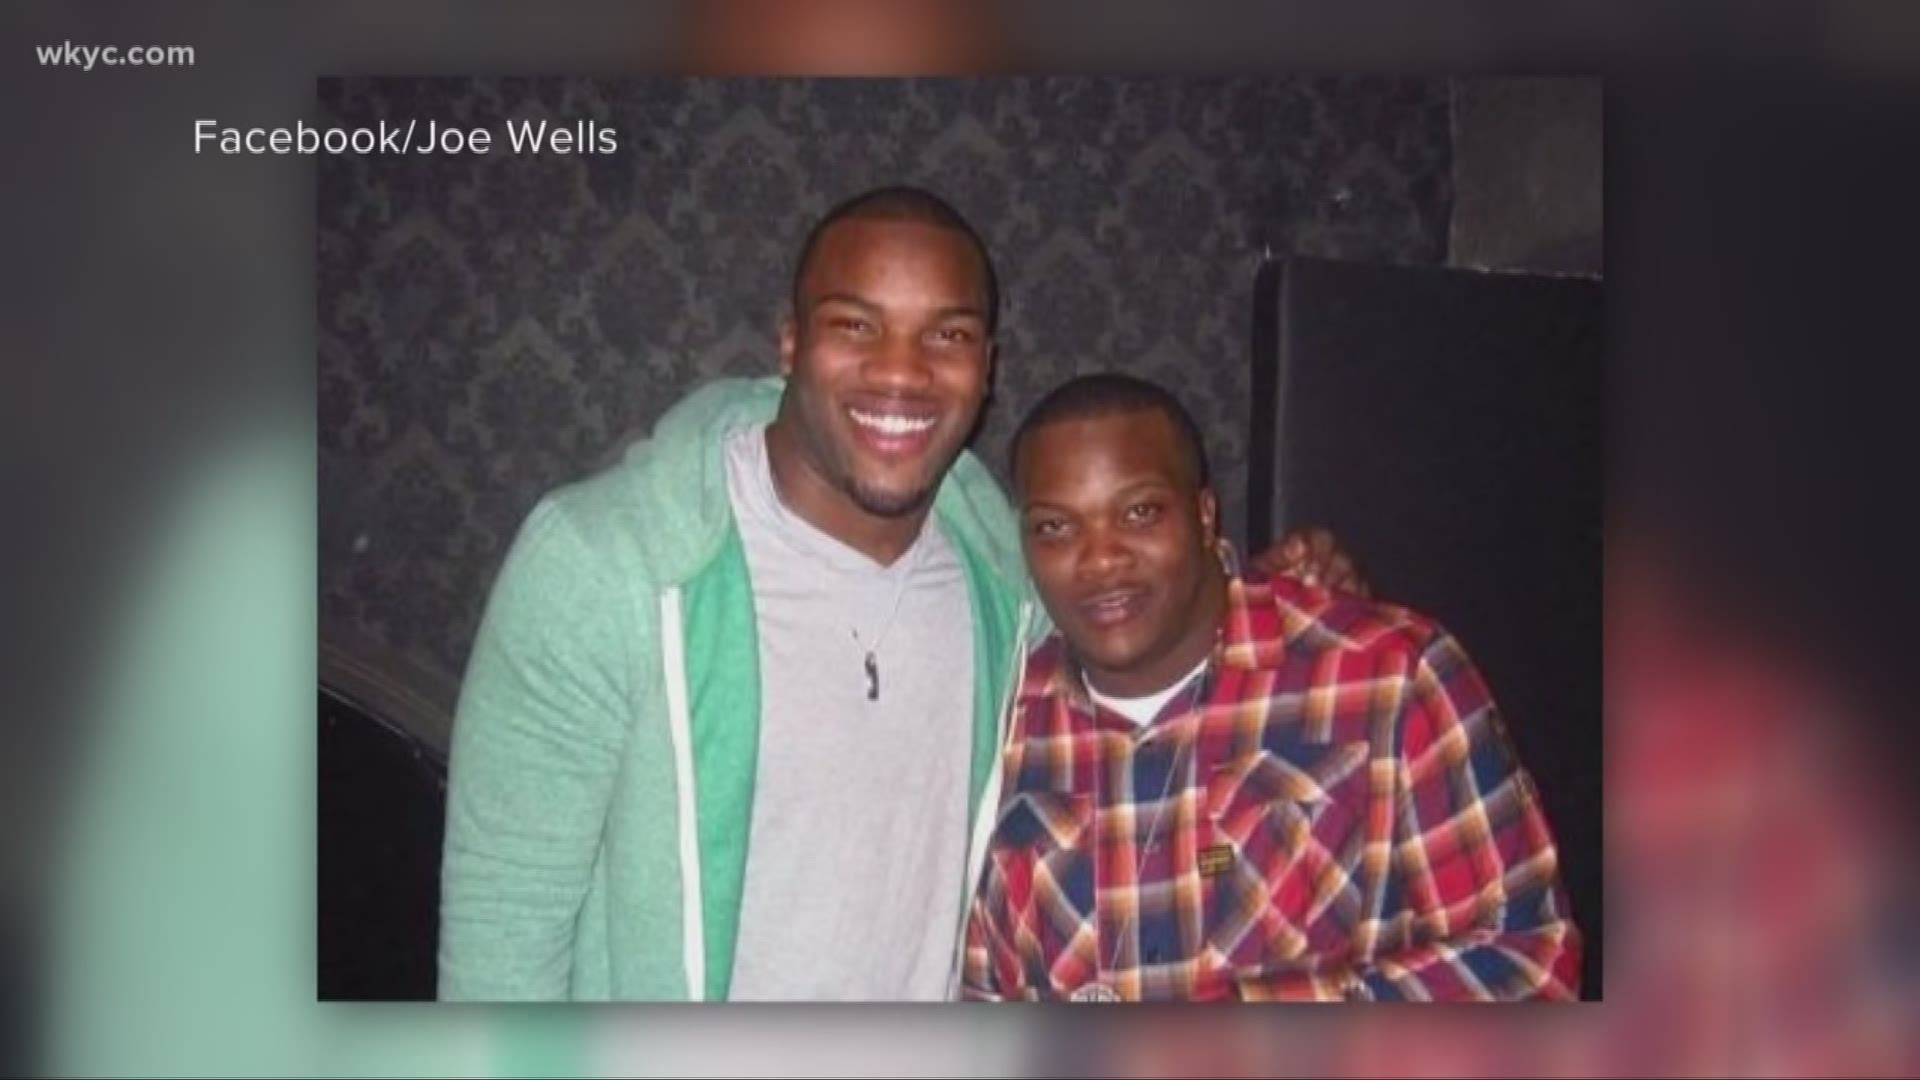 Beanie Wells speaks to WKYC following the shooting death of his brother  Joey